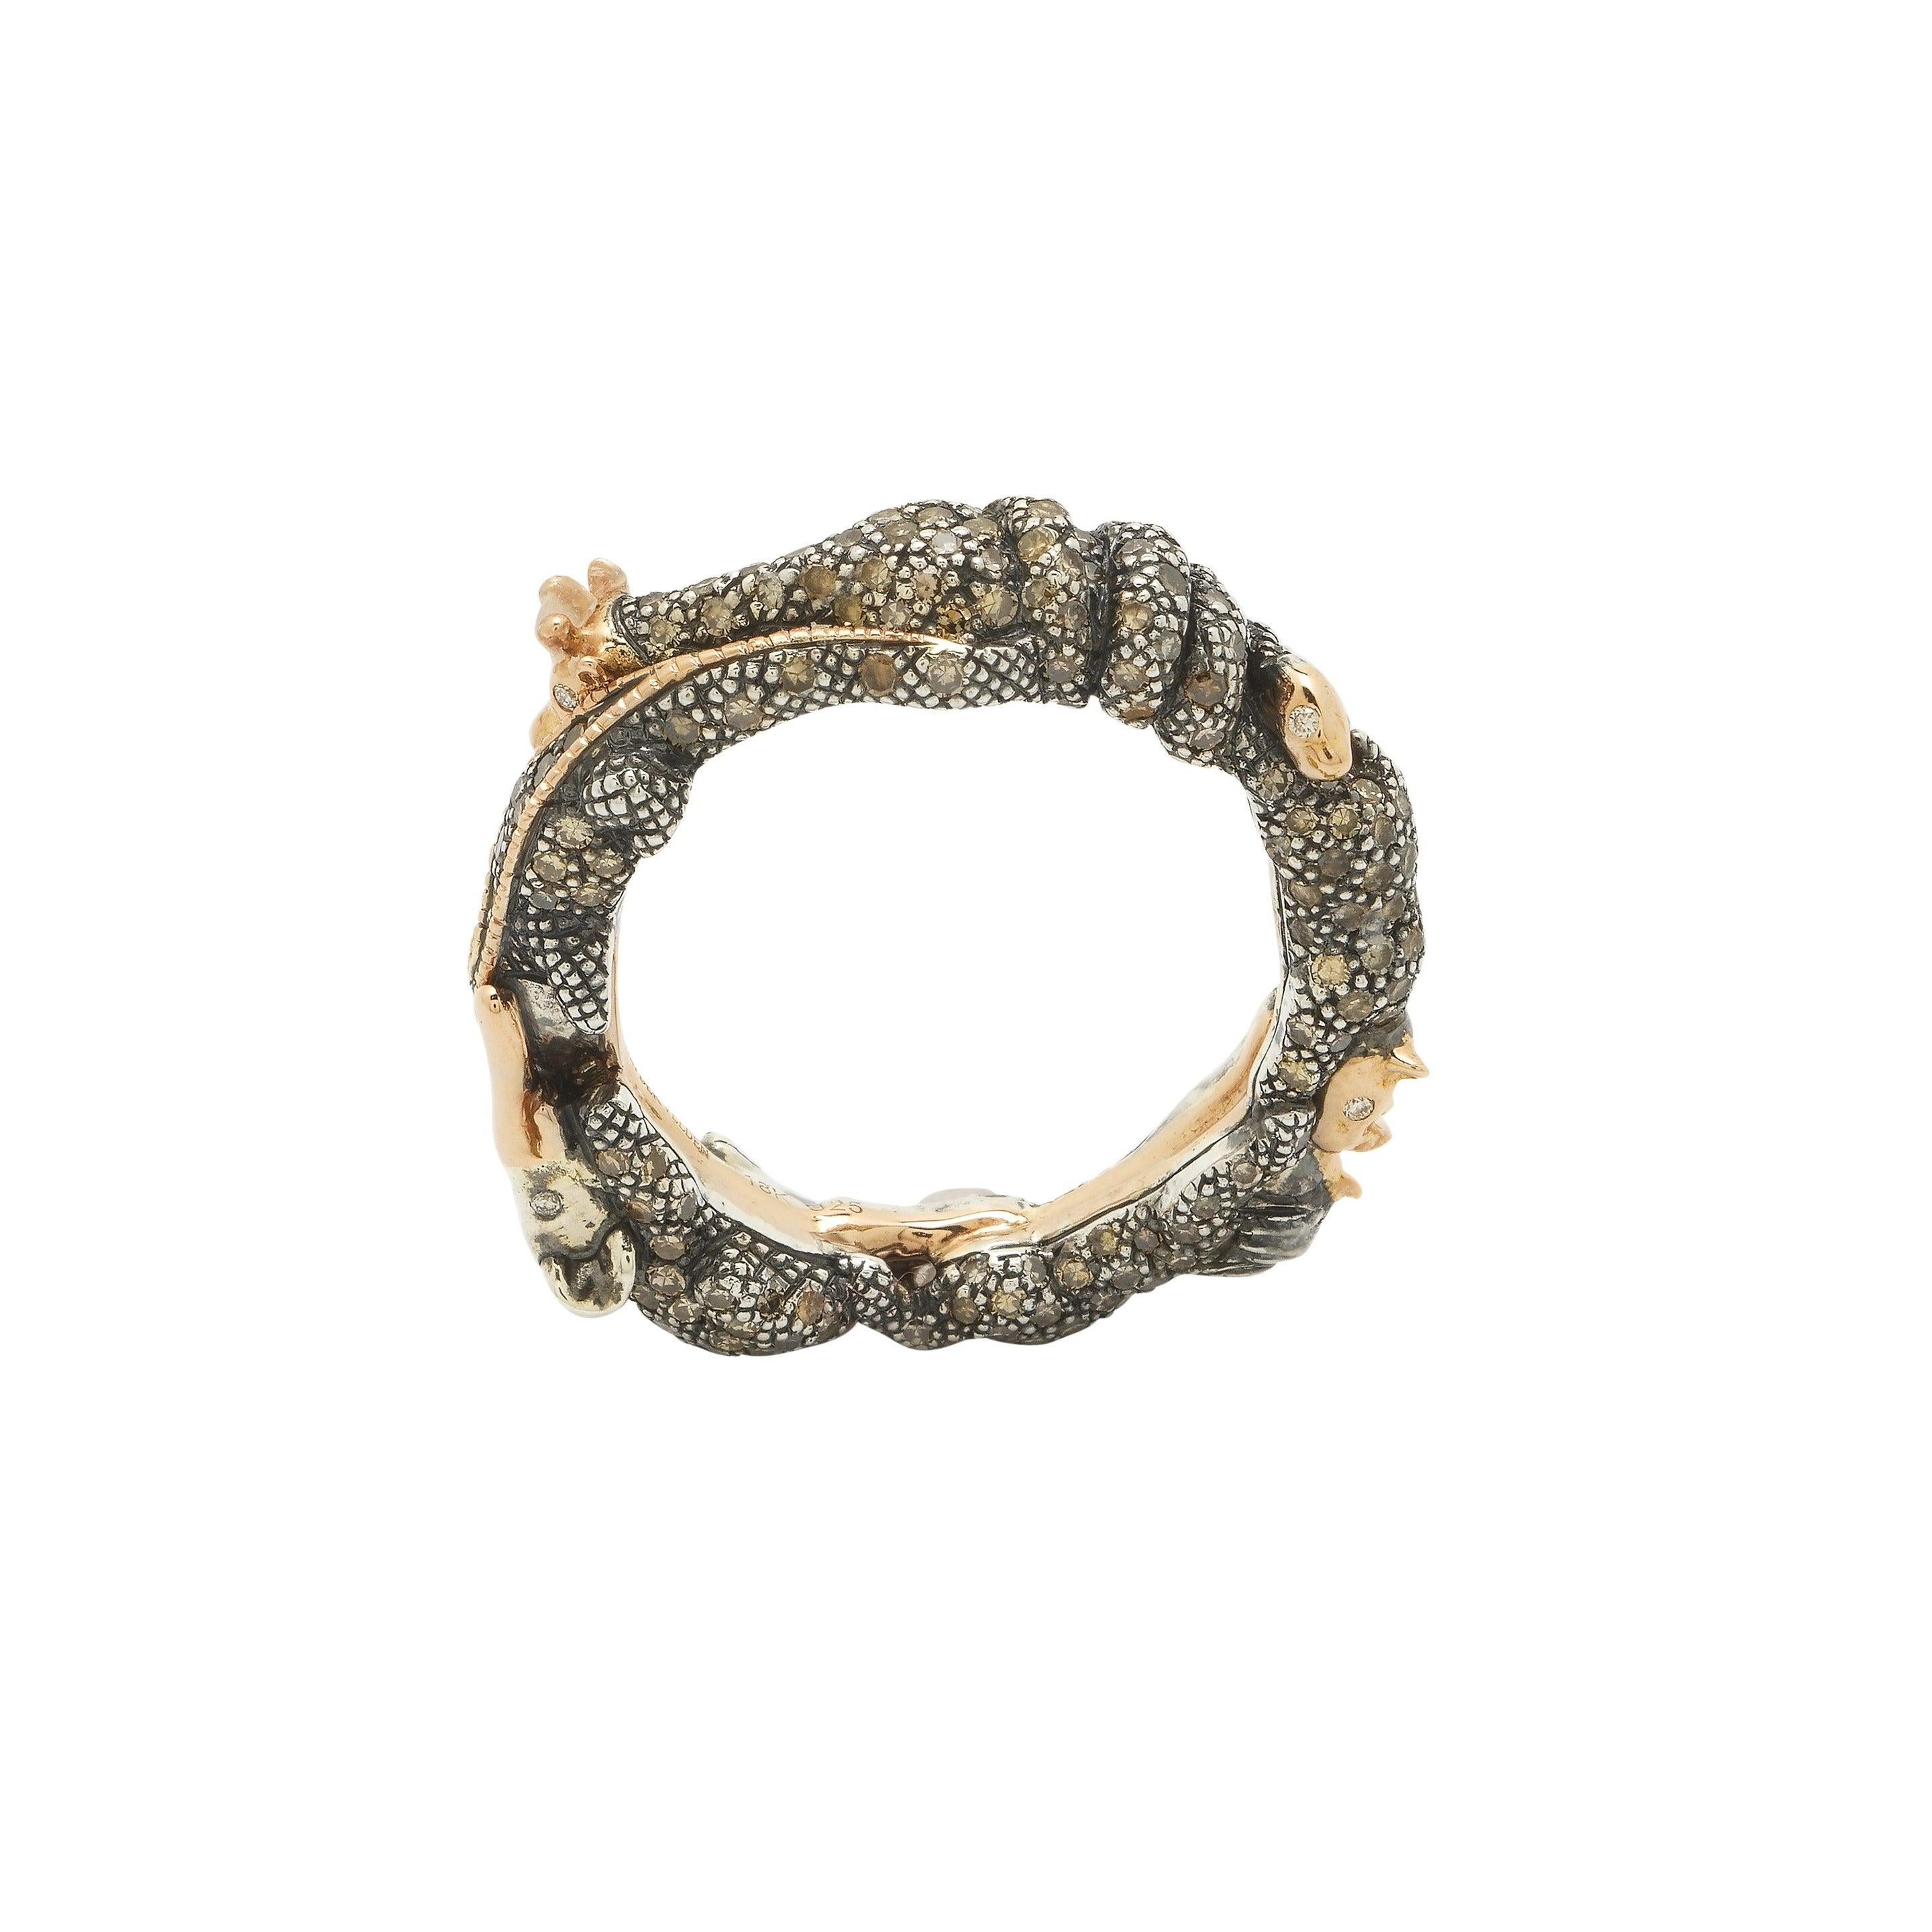 An elegant circle of life, the Animal Eternity Ring is fashioned as an intertwined knot of animals, among them a snake, a lion, and a ram. Designed in 18k recycled rose gold and sterling silver, these finely-crafted animals have twinkling white